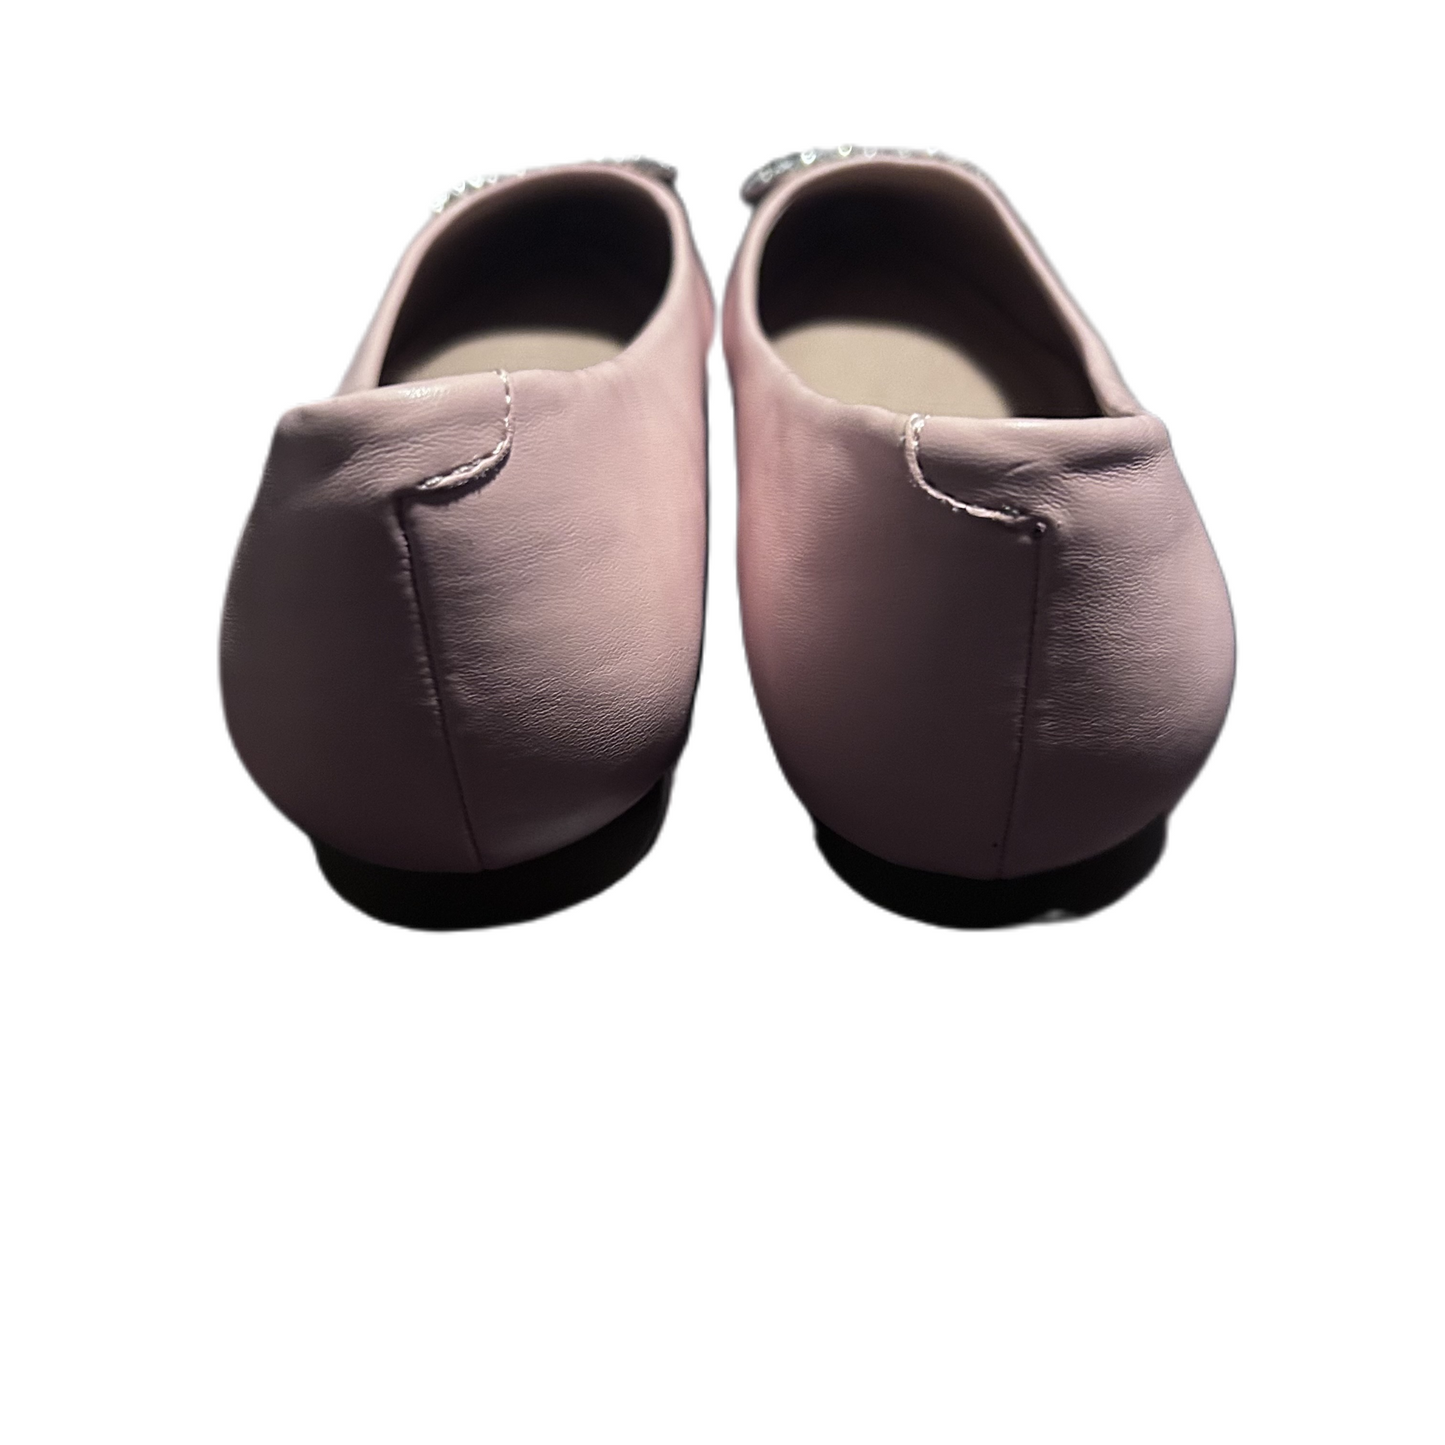 Shoes Flats By Journee  Size: 7.5